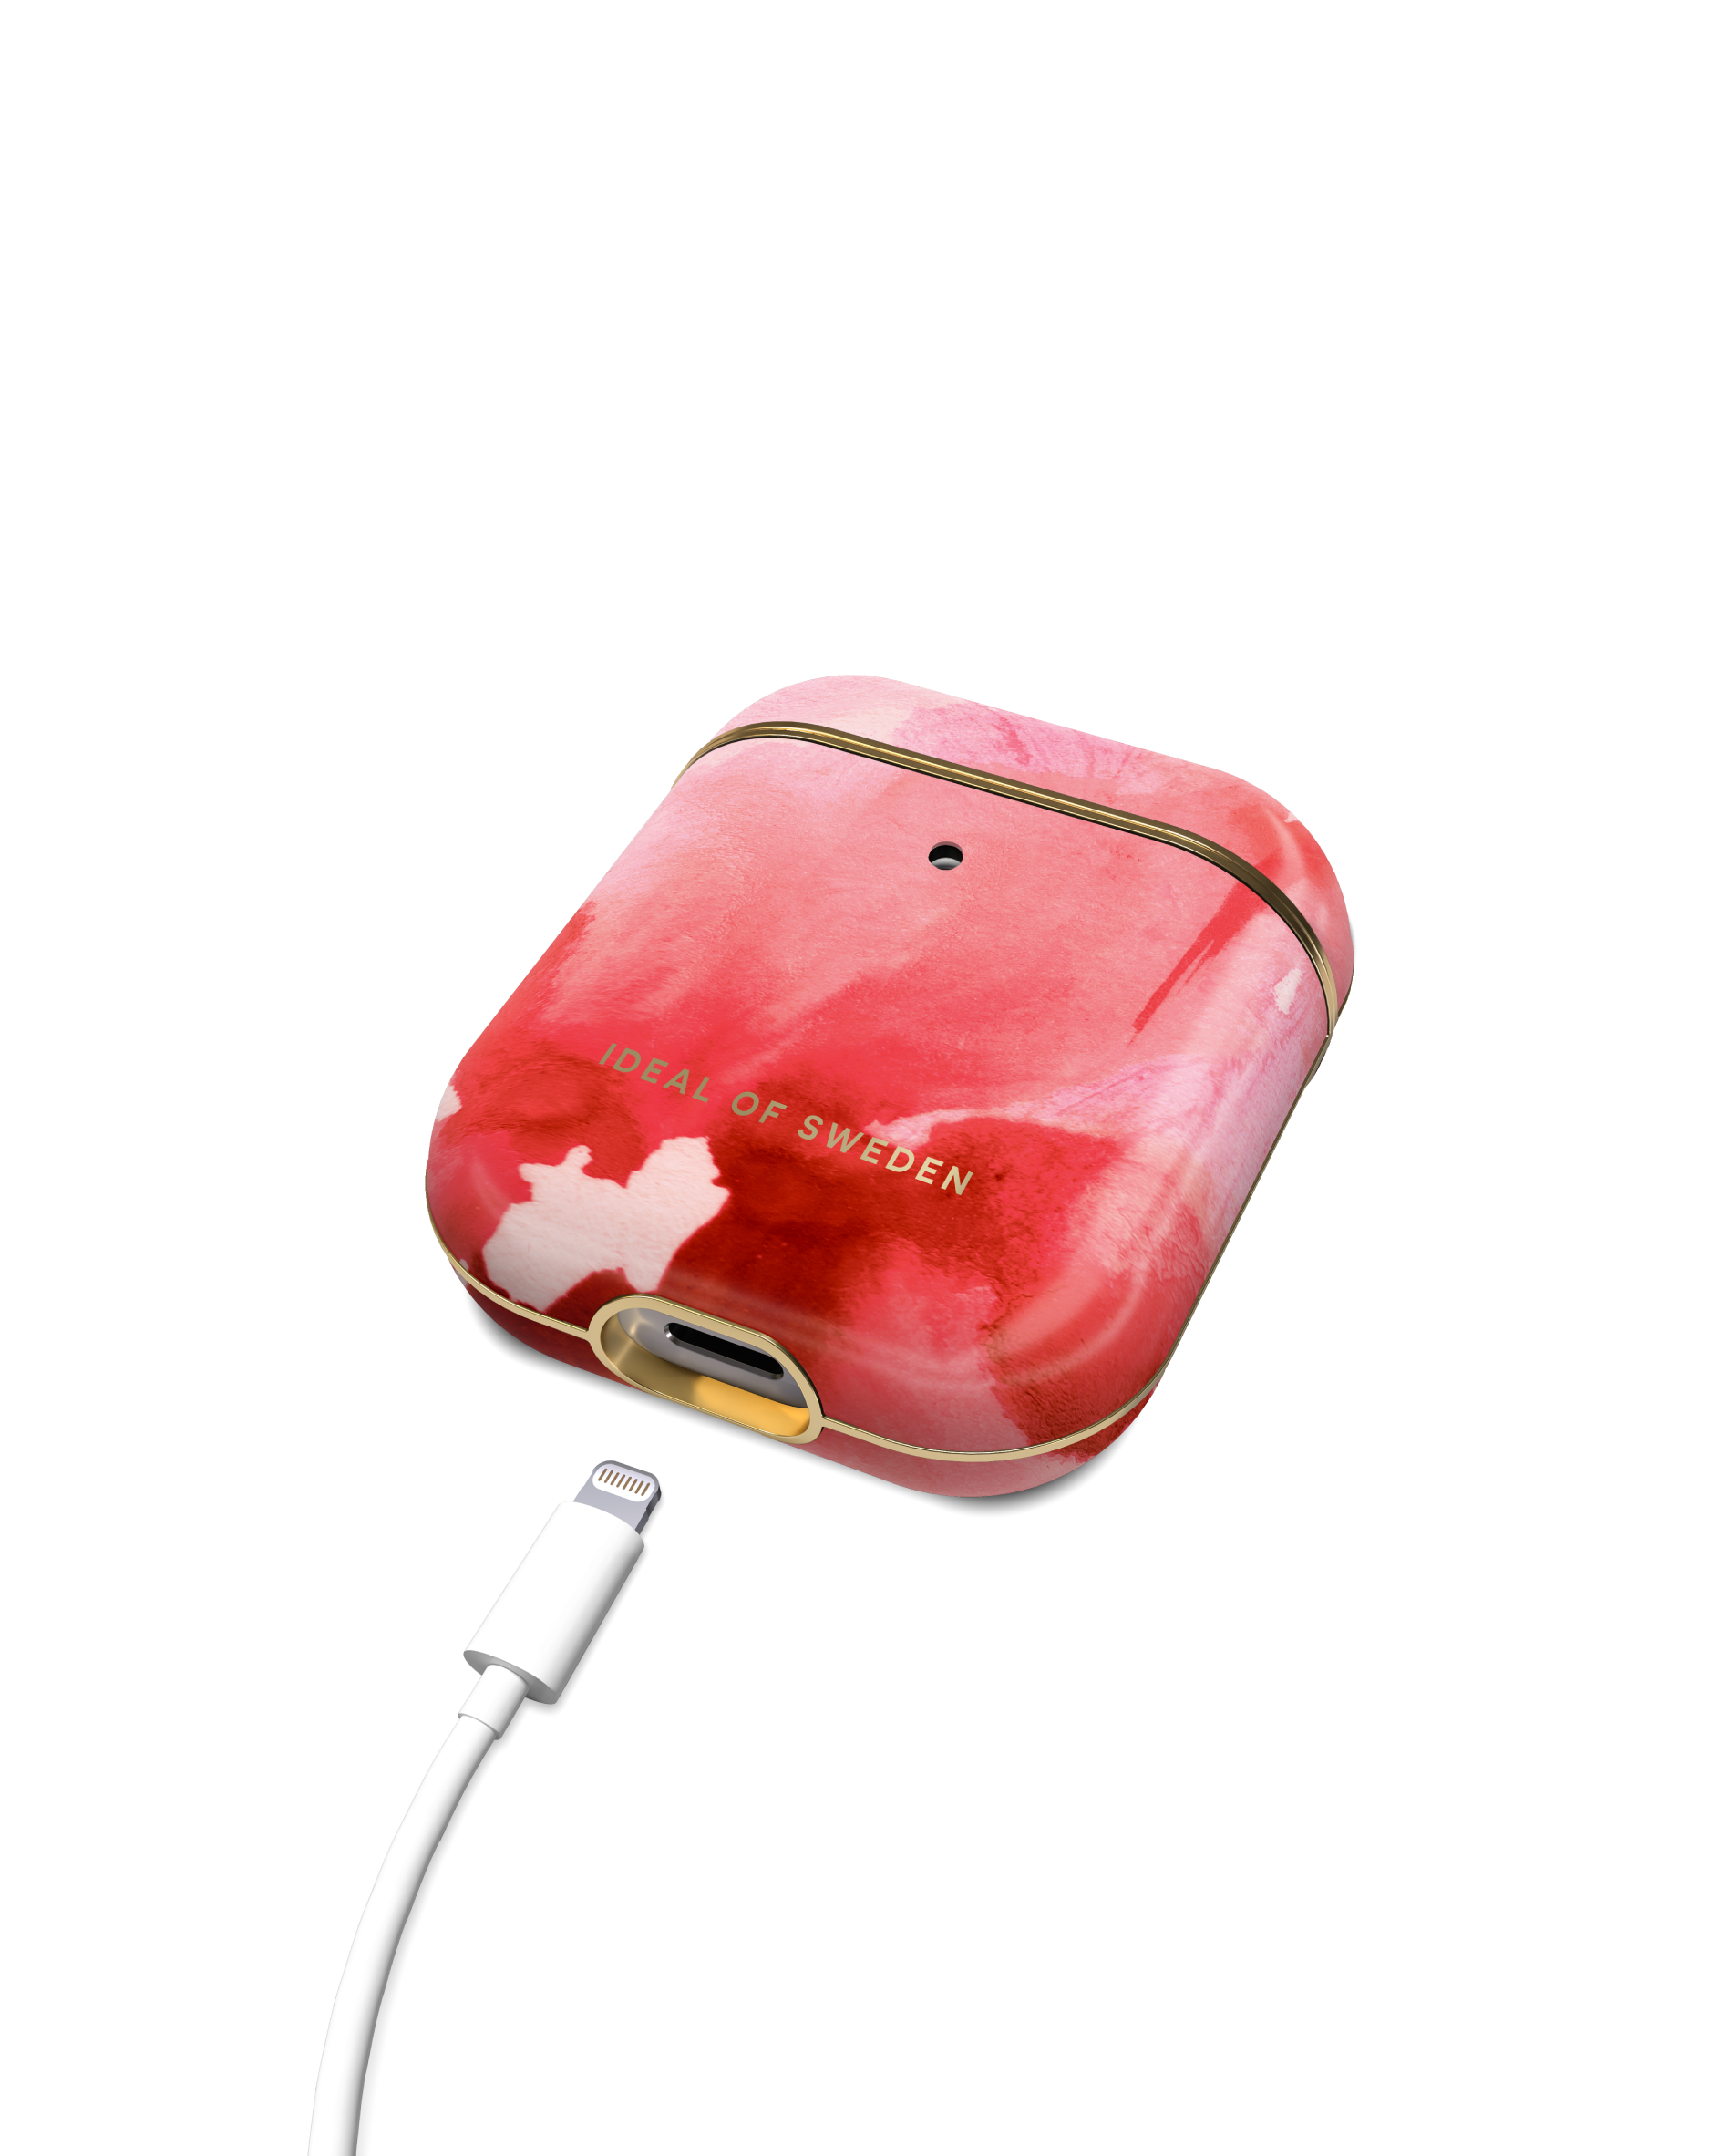 Blush AirPod Full OF SWEDEN IDEAL für: Cover IDFAPCSS21-260 Marble Coral Apple Case passend